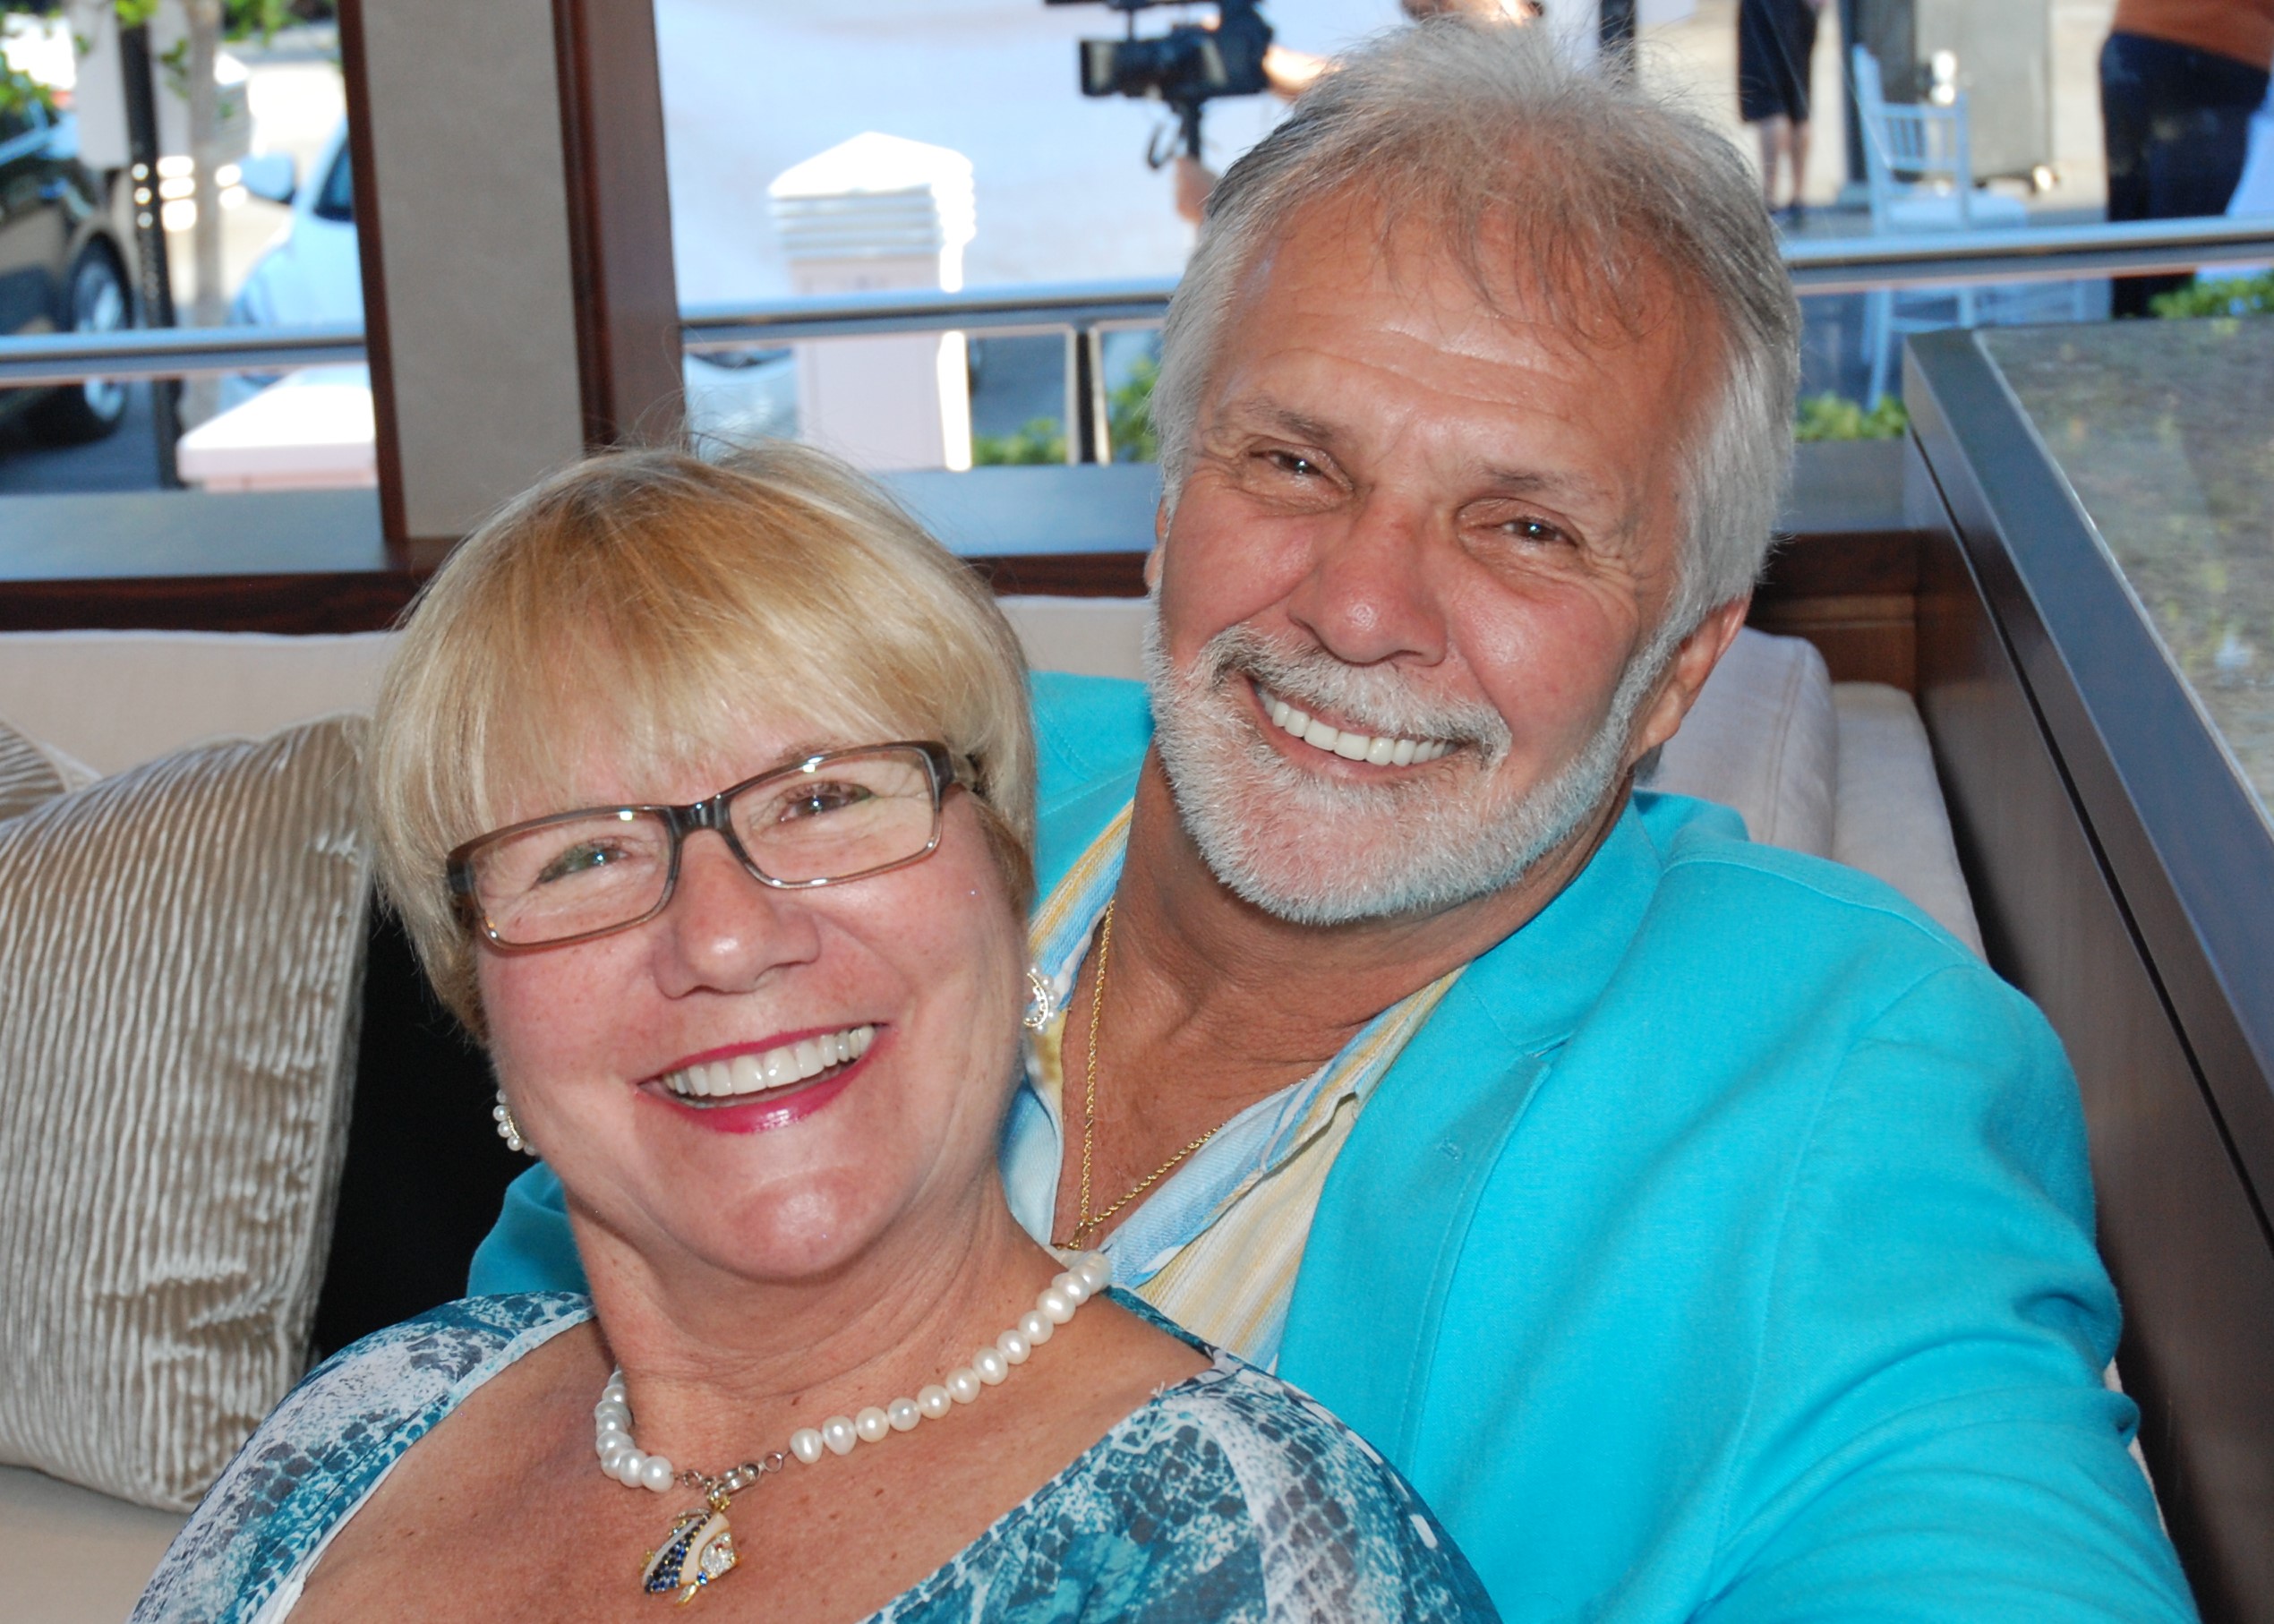 Captain Lee, Bravo TV's Below Deck and his wife Mary Ann